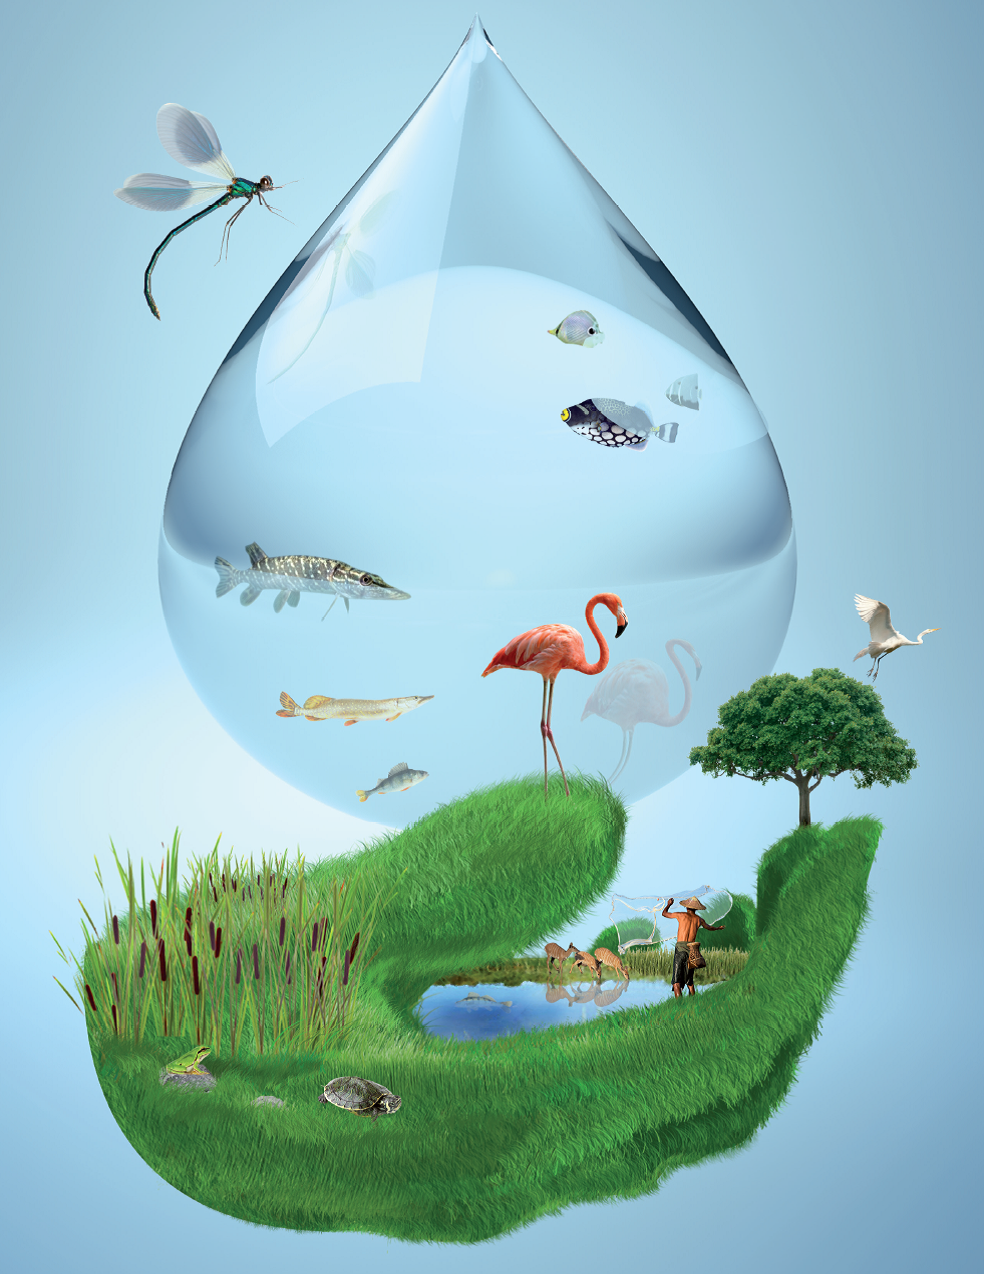 World Wetlands Day poster